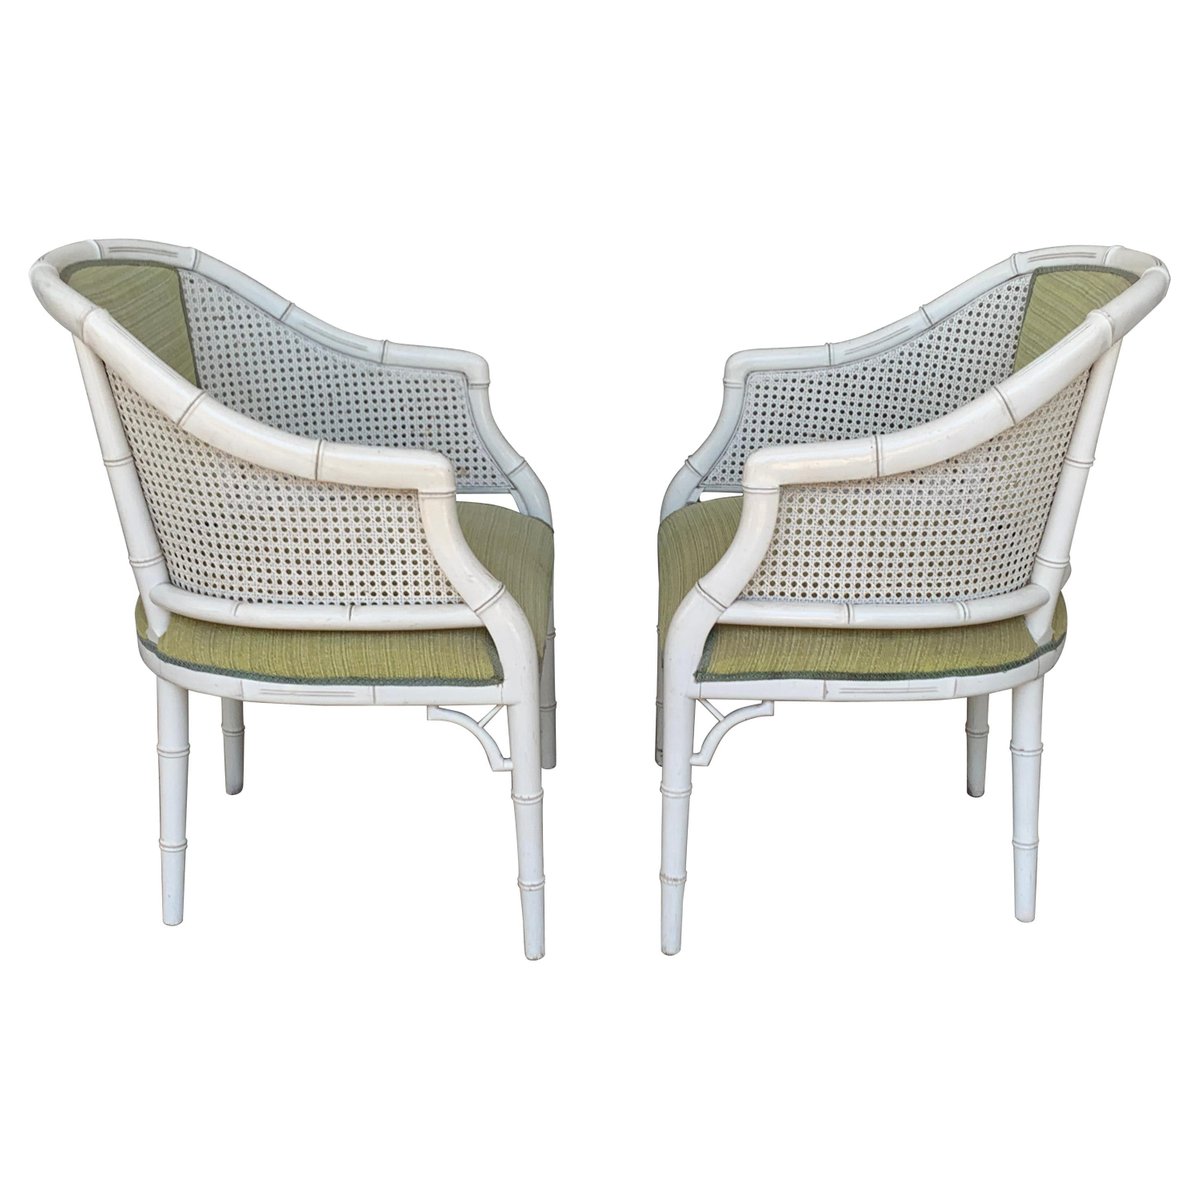 hollywood regency faux bamboo chairs set of 2 PSK-1002490